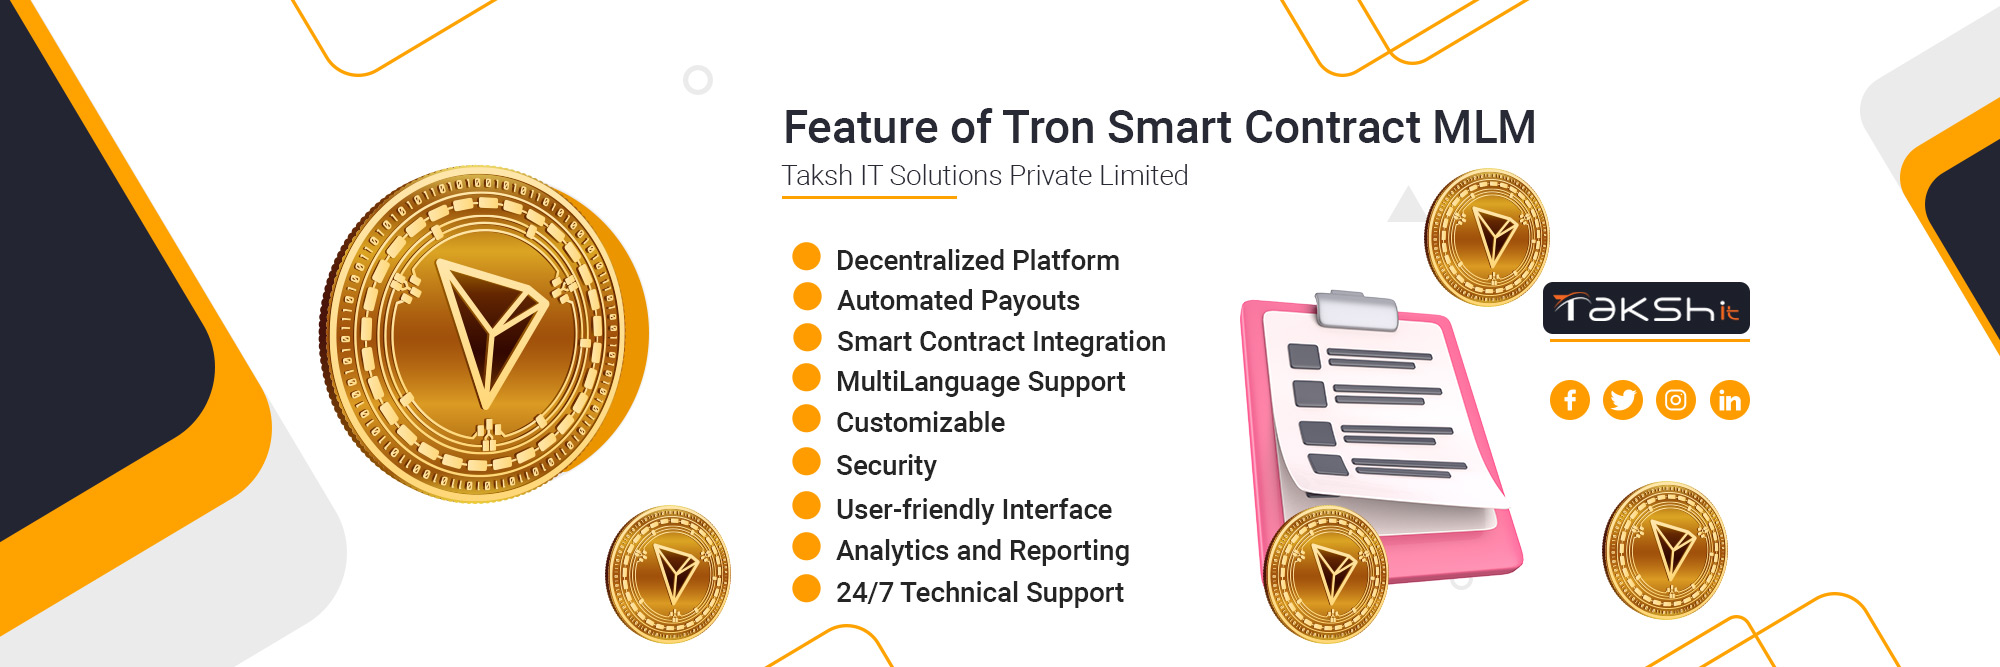 Features Of Tron Smart Contract MLM Software | Taksh It Solutions Private Limited